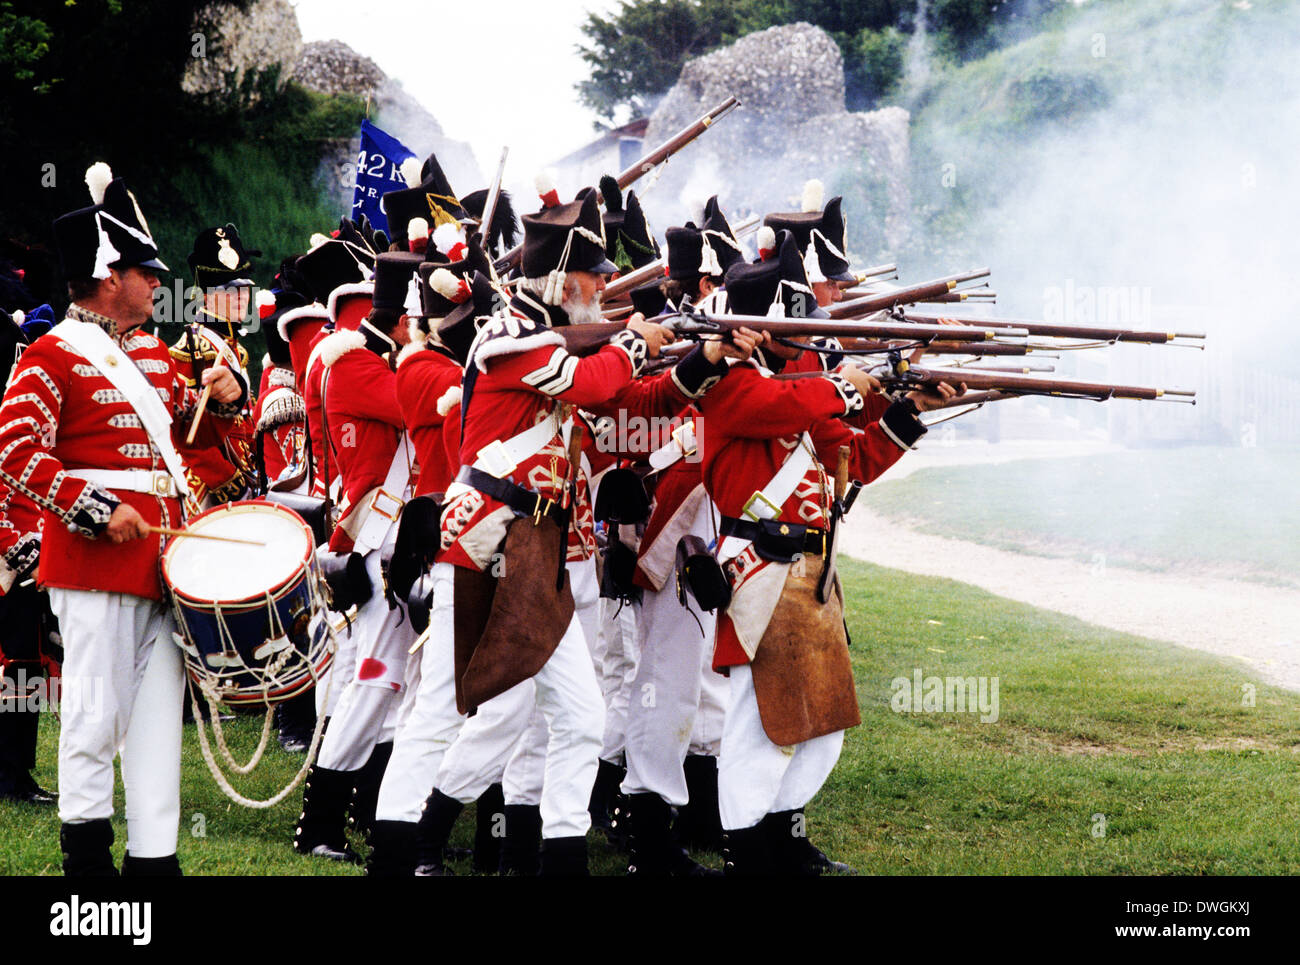 British soldiers, musket volley, 1815, as deployed at Battle of Waterloo, historical re-enactment, 42nd Regiment of Foot soldier musket muskets firing Army uniform uniforms Stock Photo